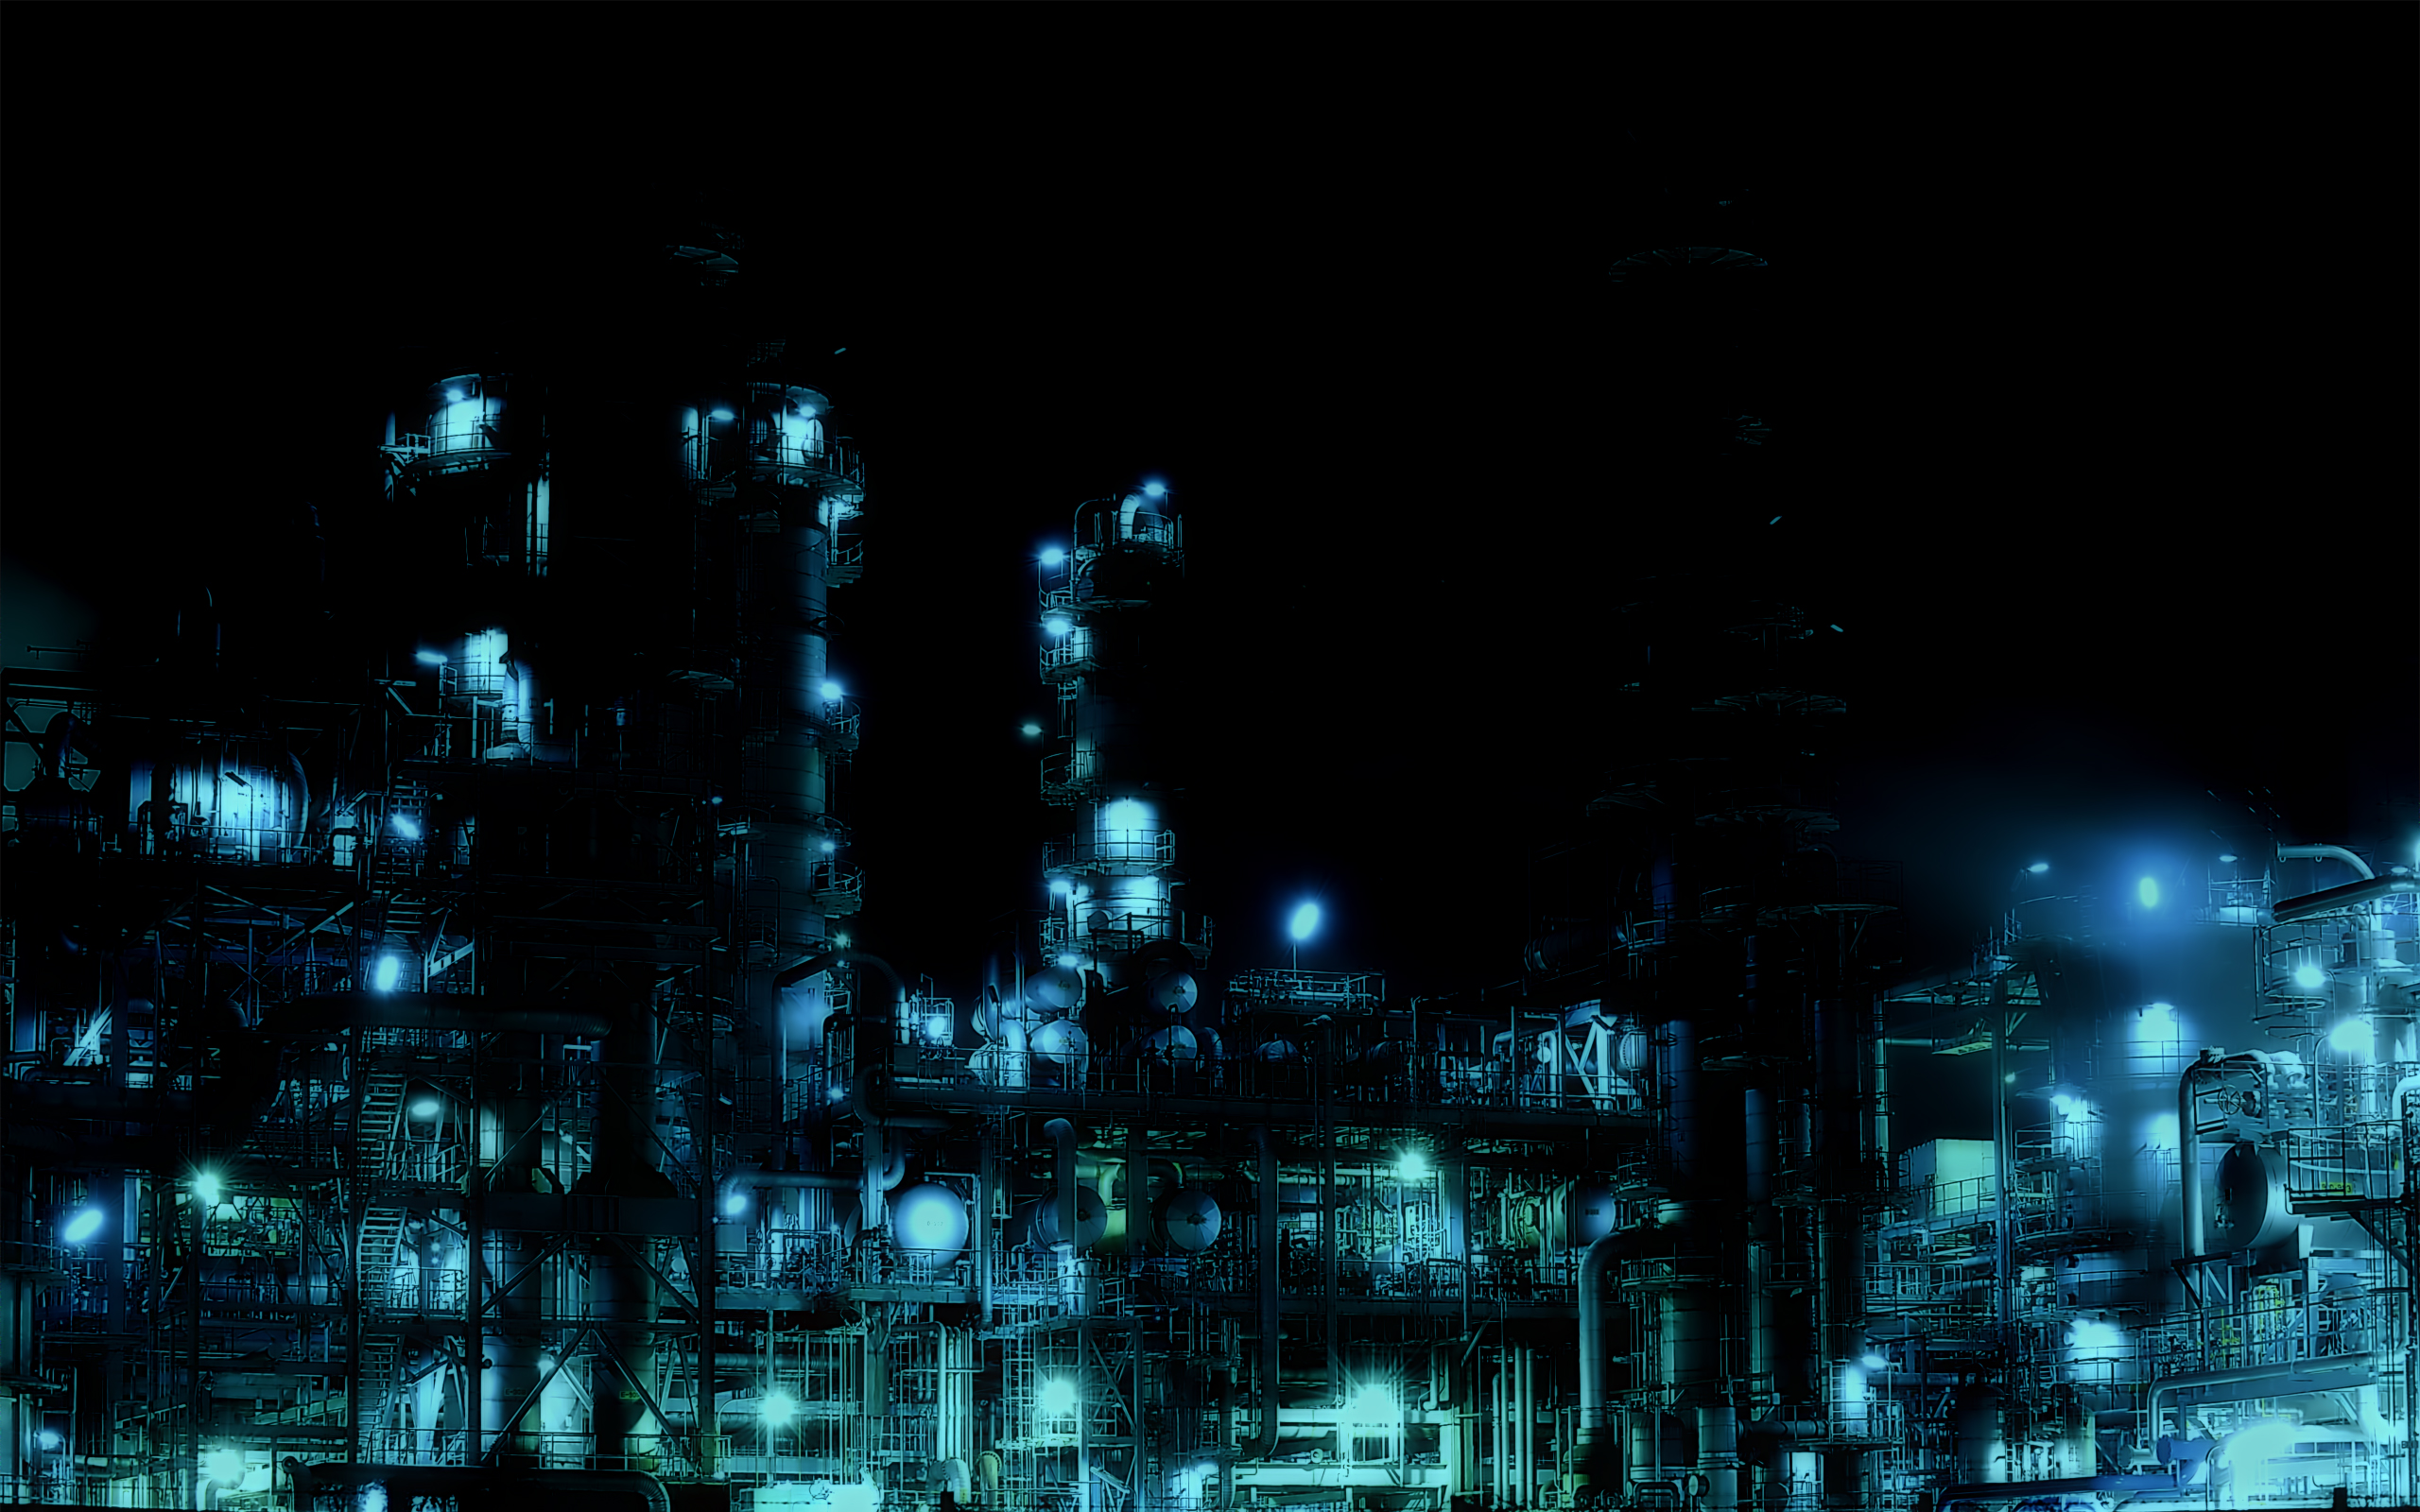 Stunning desktop wallpaper showcasing a meticulously crafted refinery.